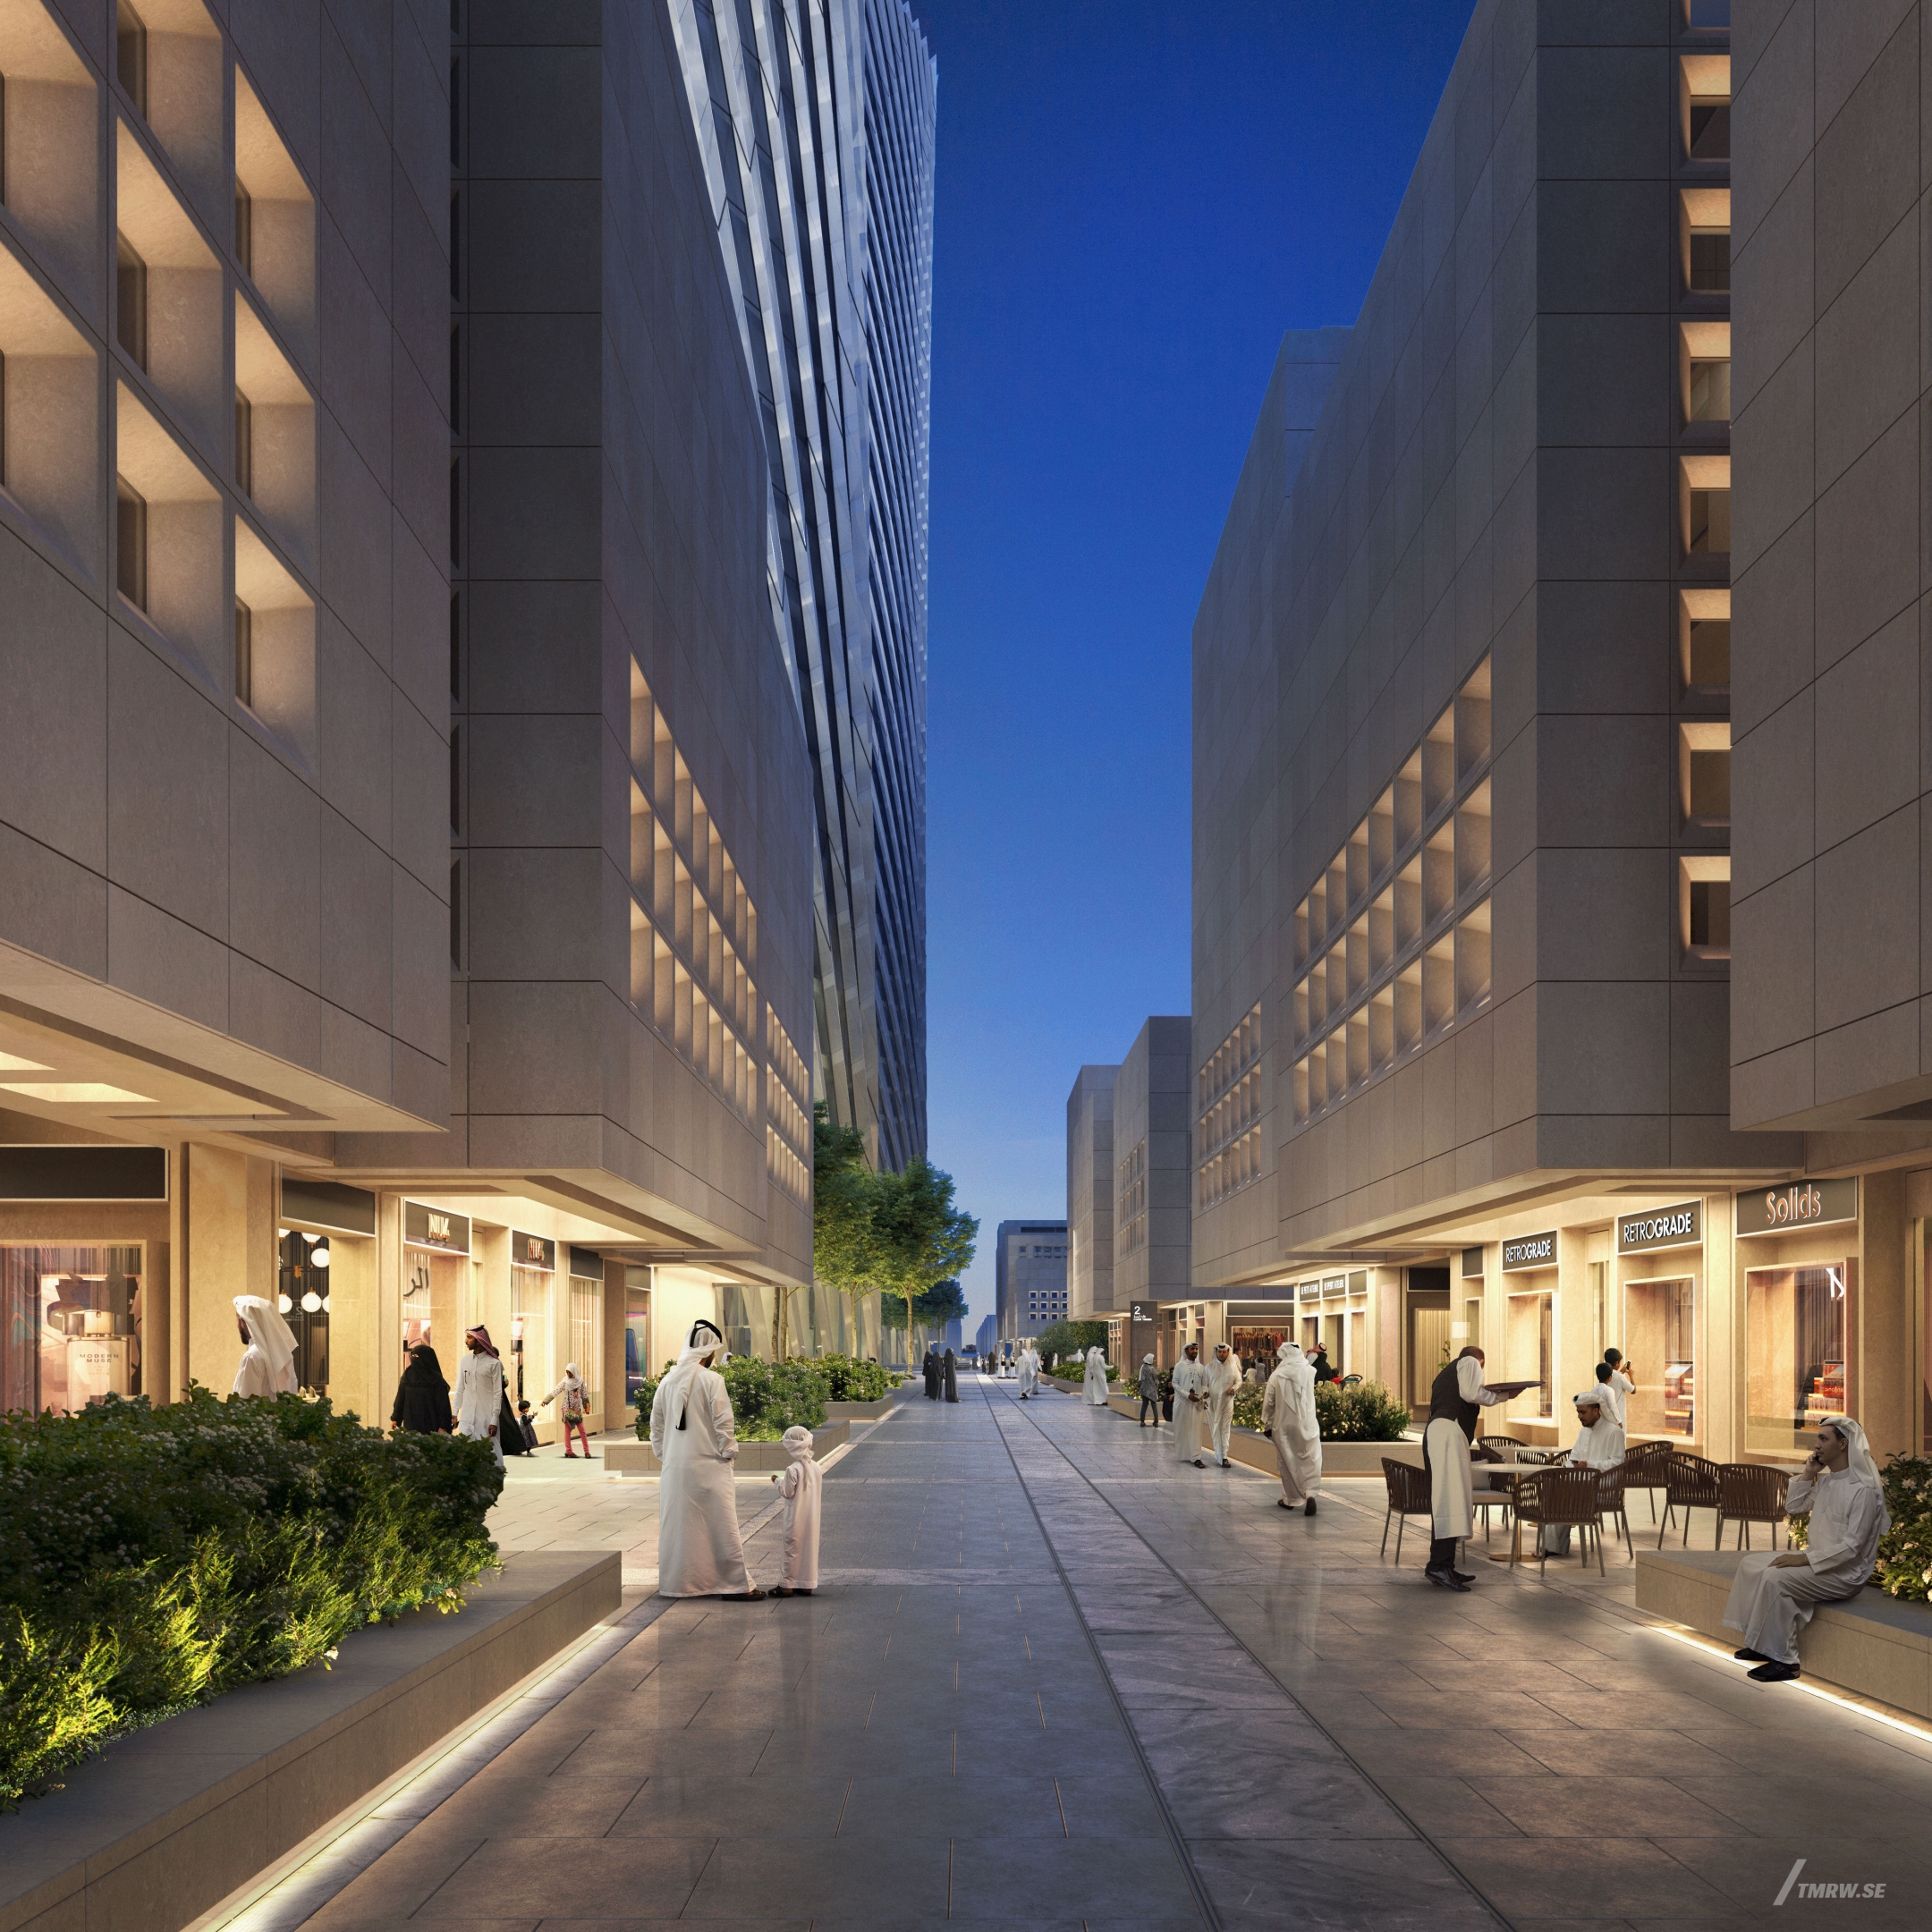 Architectural visualization of Lusail Towers for Foster & Partners. An image of a pedestrianized shopping street surrounded by retail buildings in the evening.